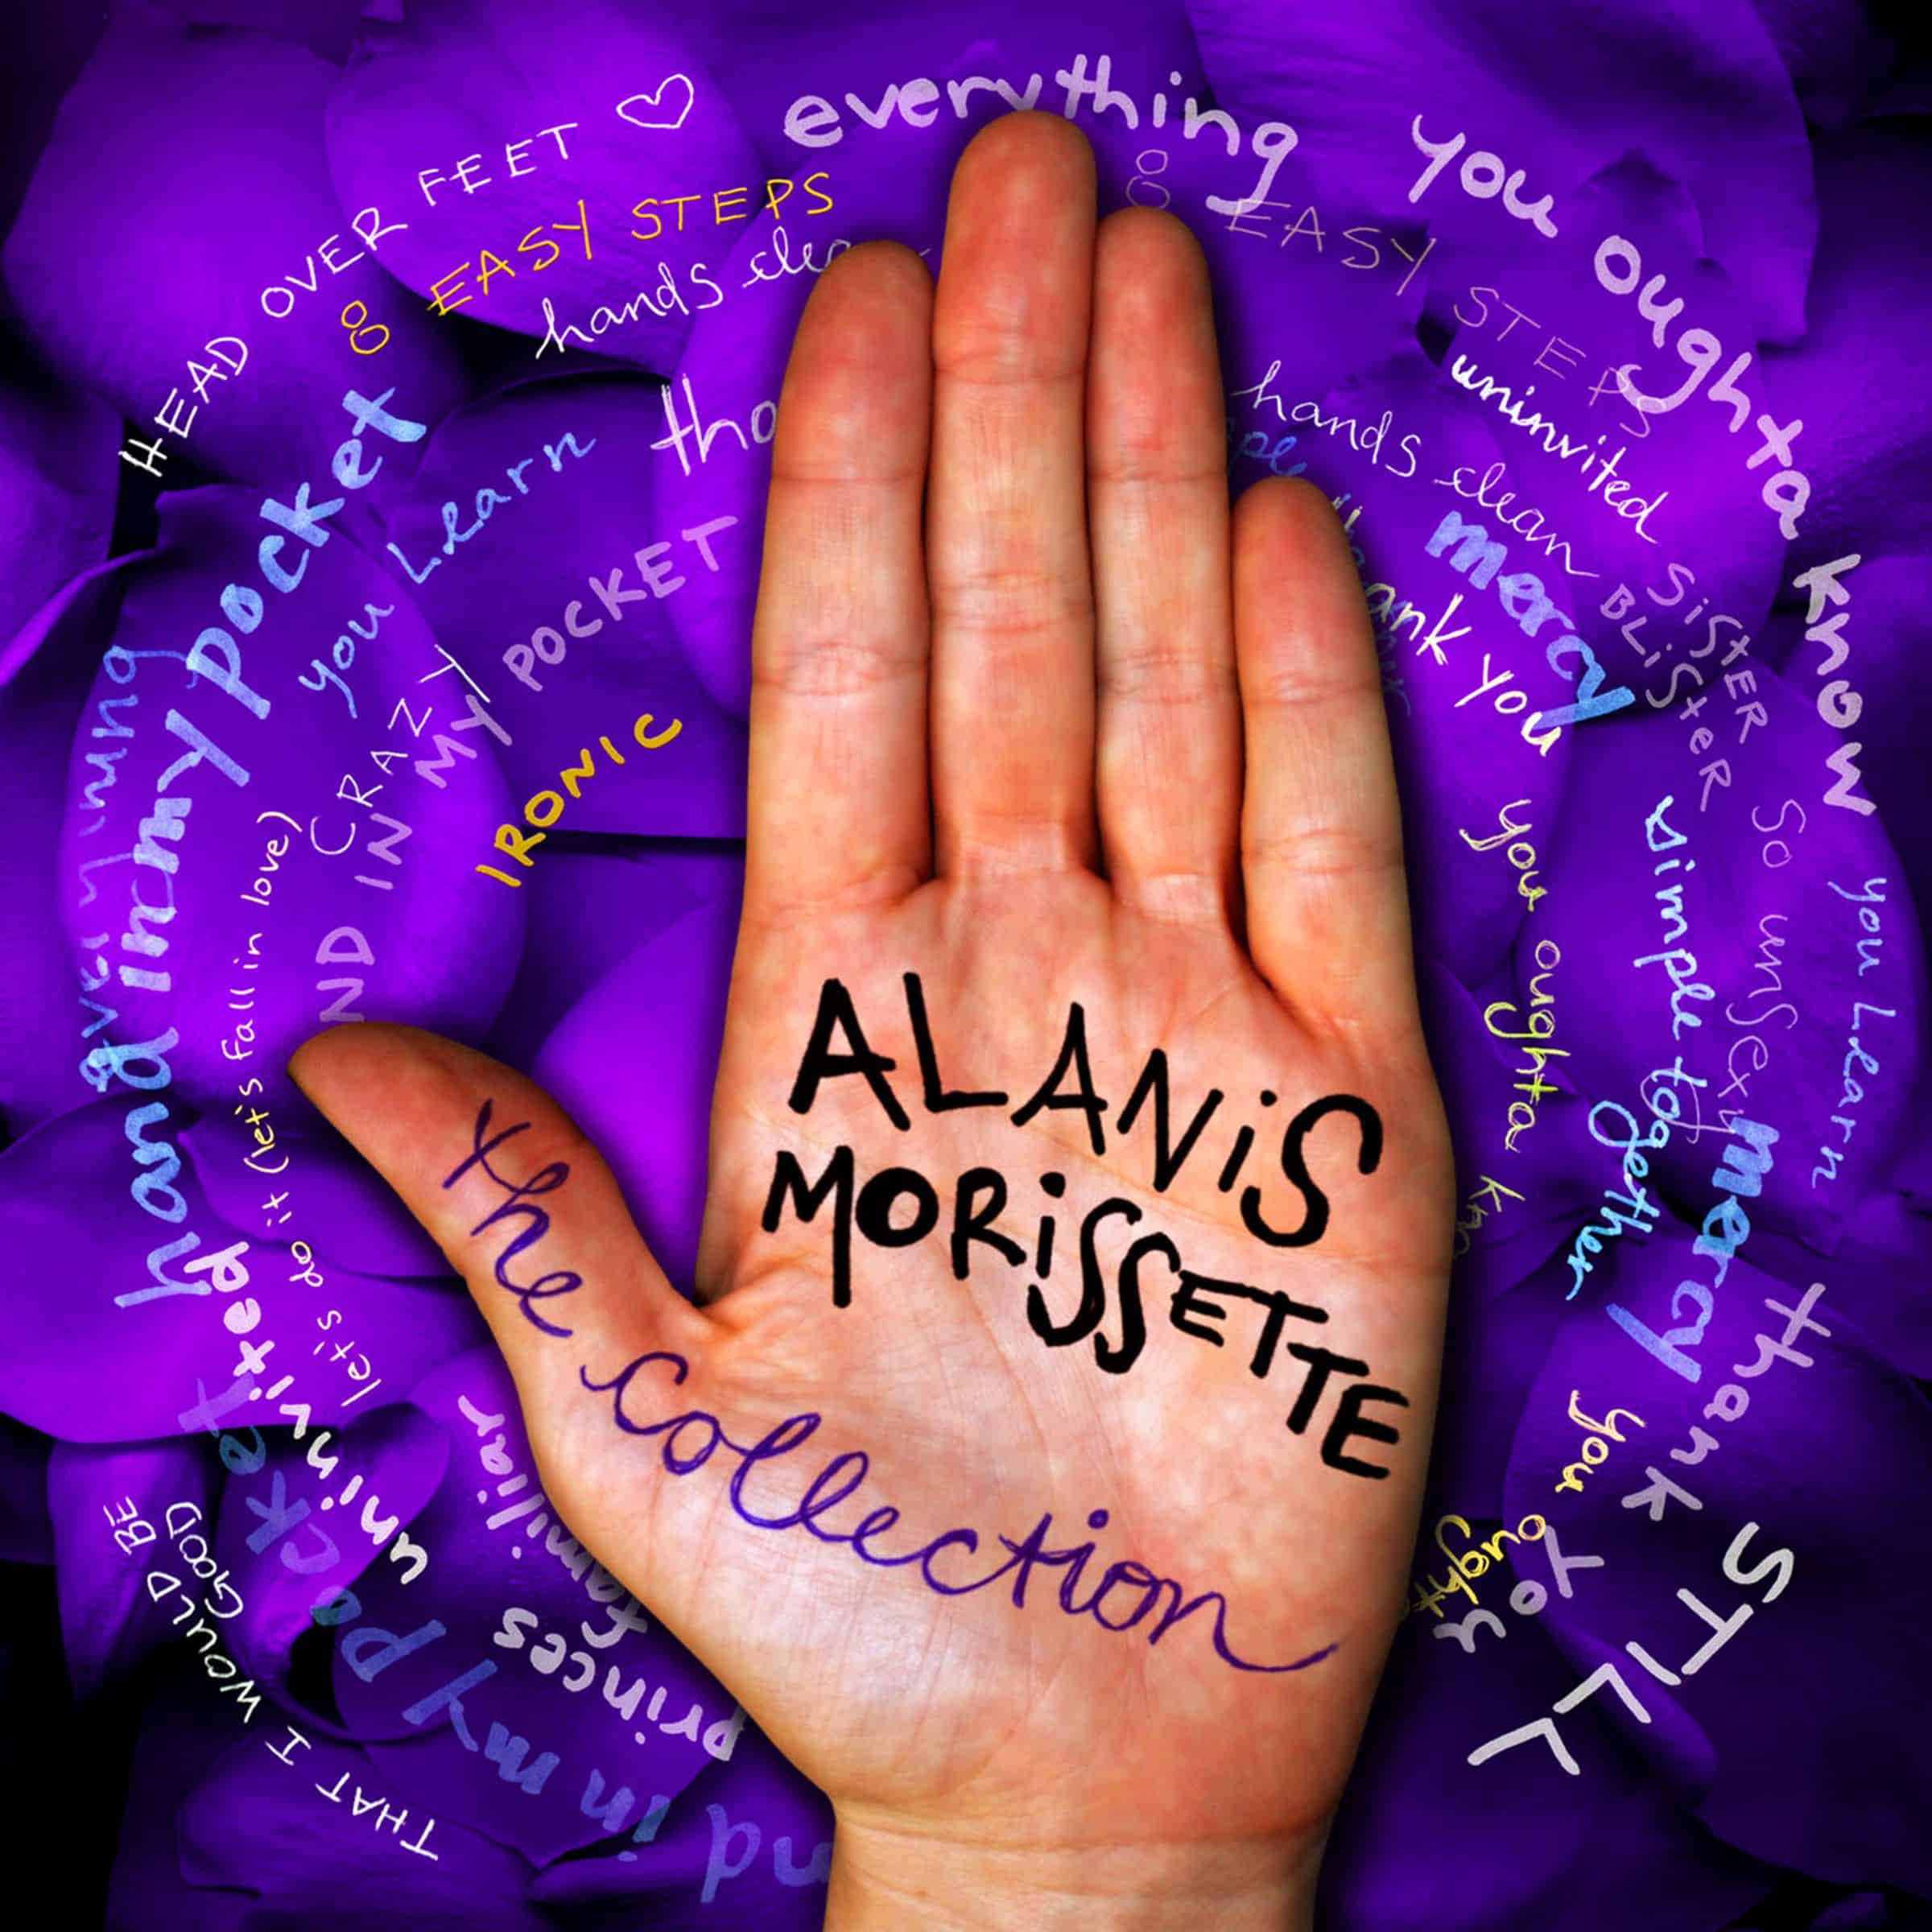 Alanis-Morissette-The-Collection.jpg